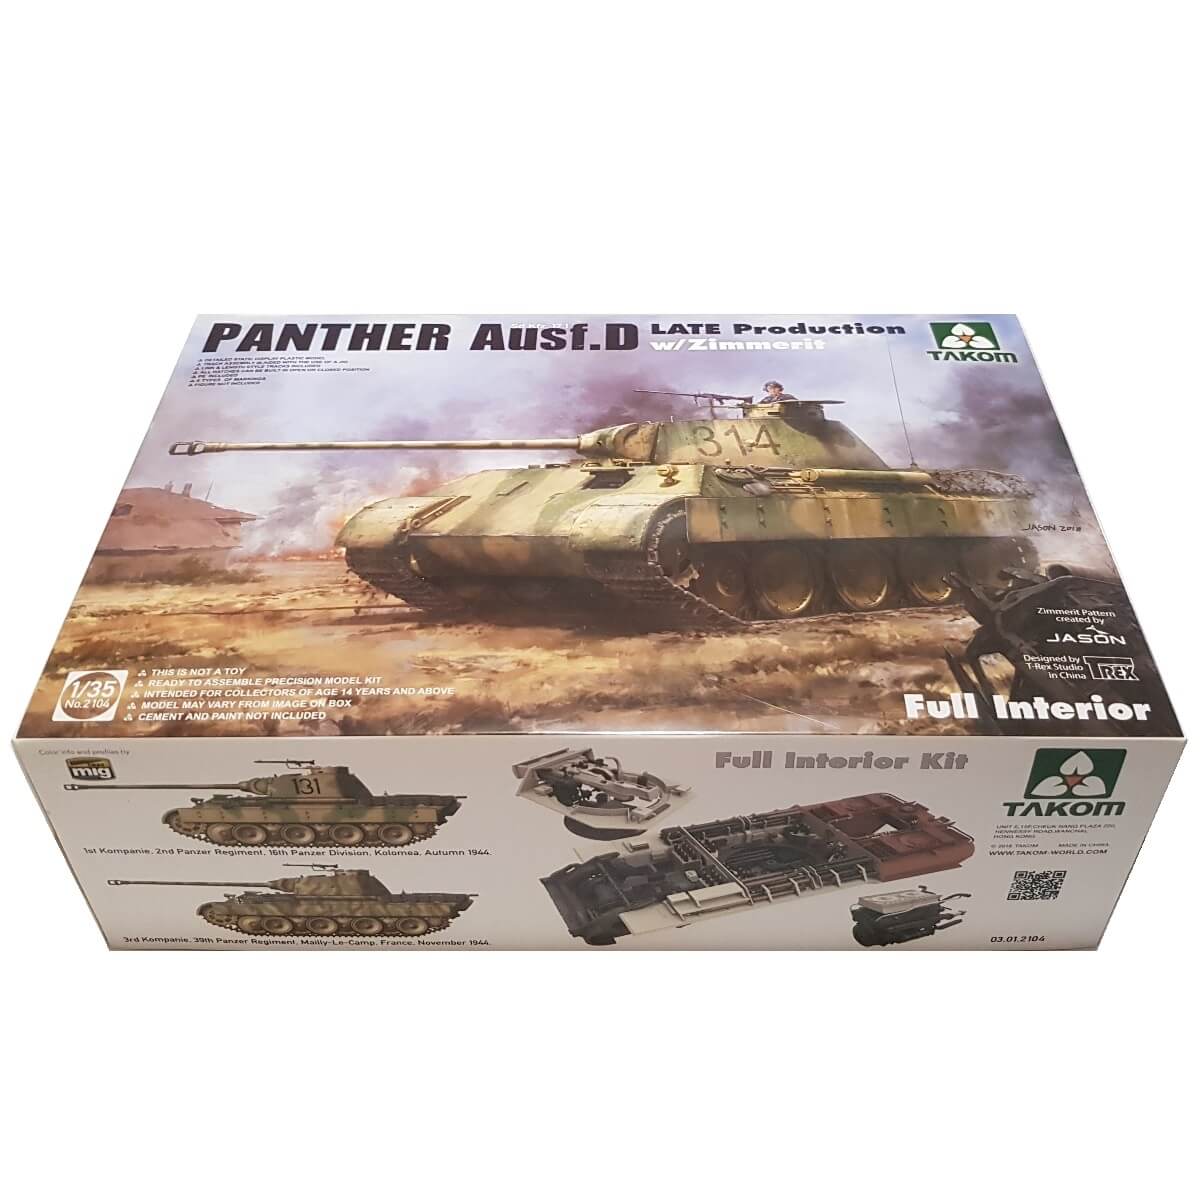 1:35 Sd.Kfz. 171 Panther Ausf. D Late Production with Zimmerit and Full Interior - TAKOM